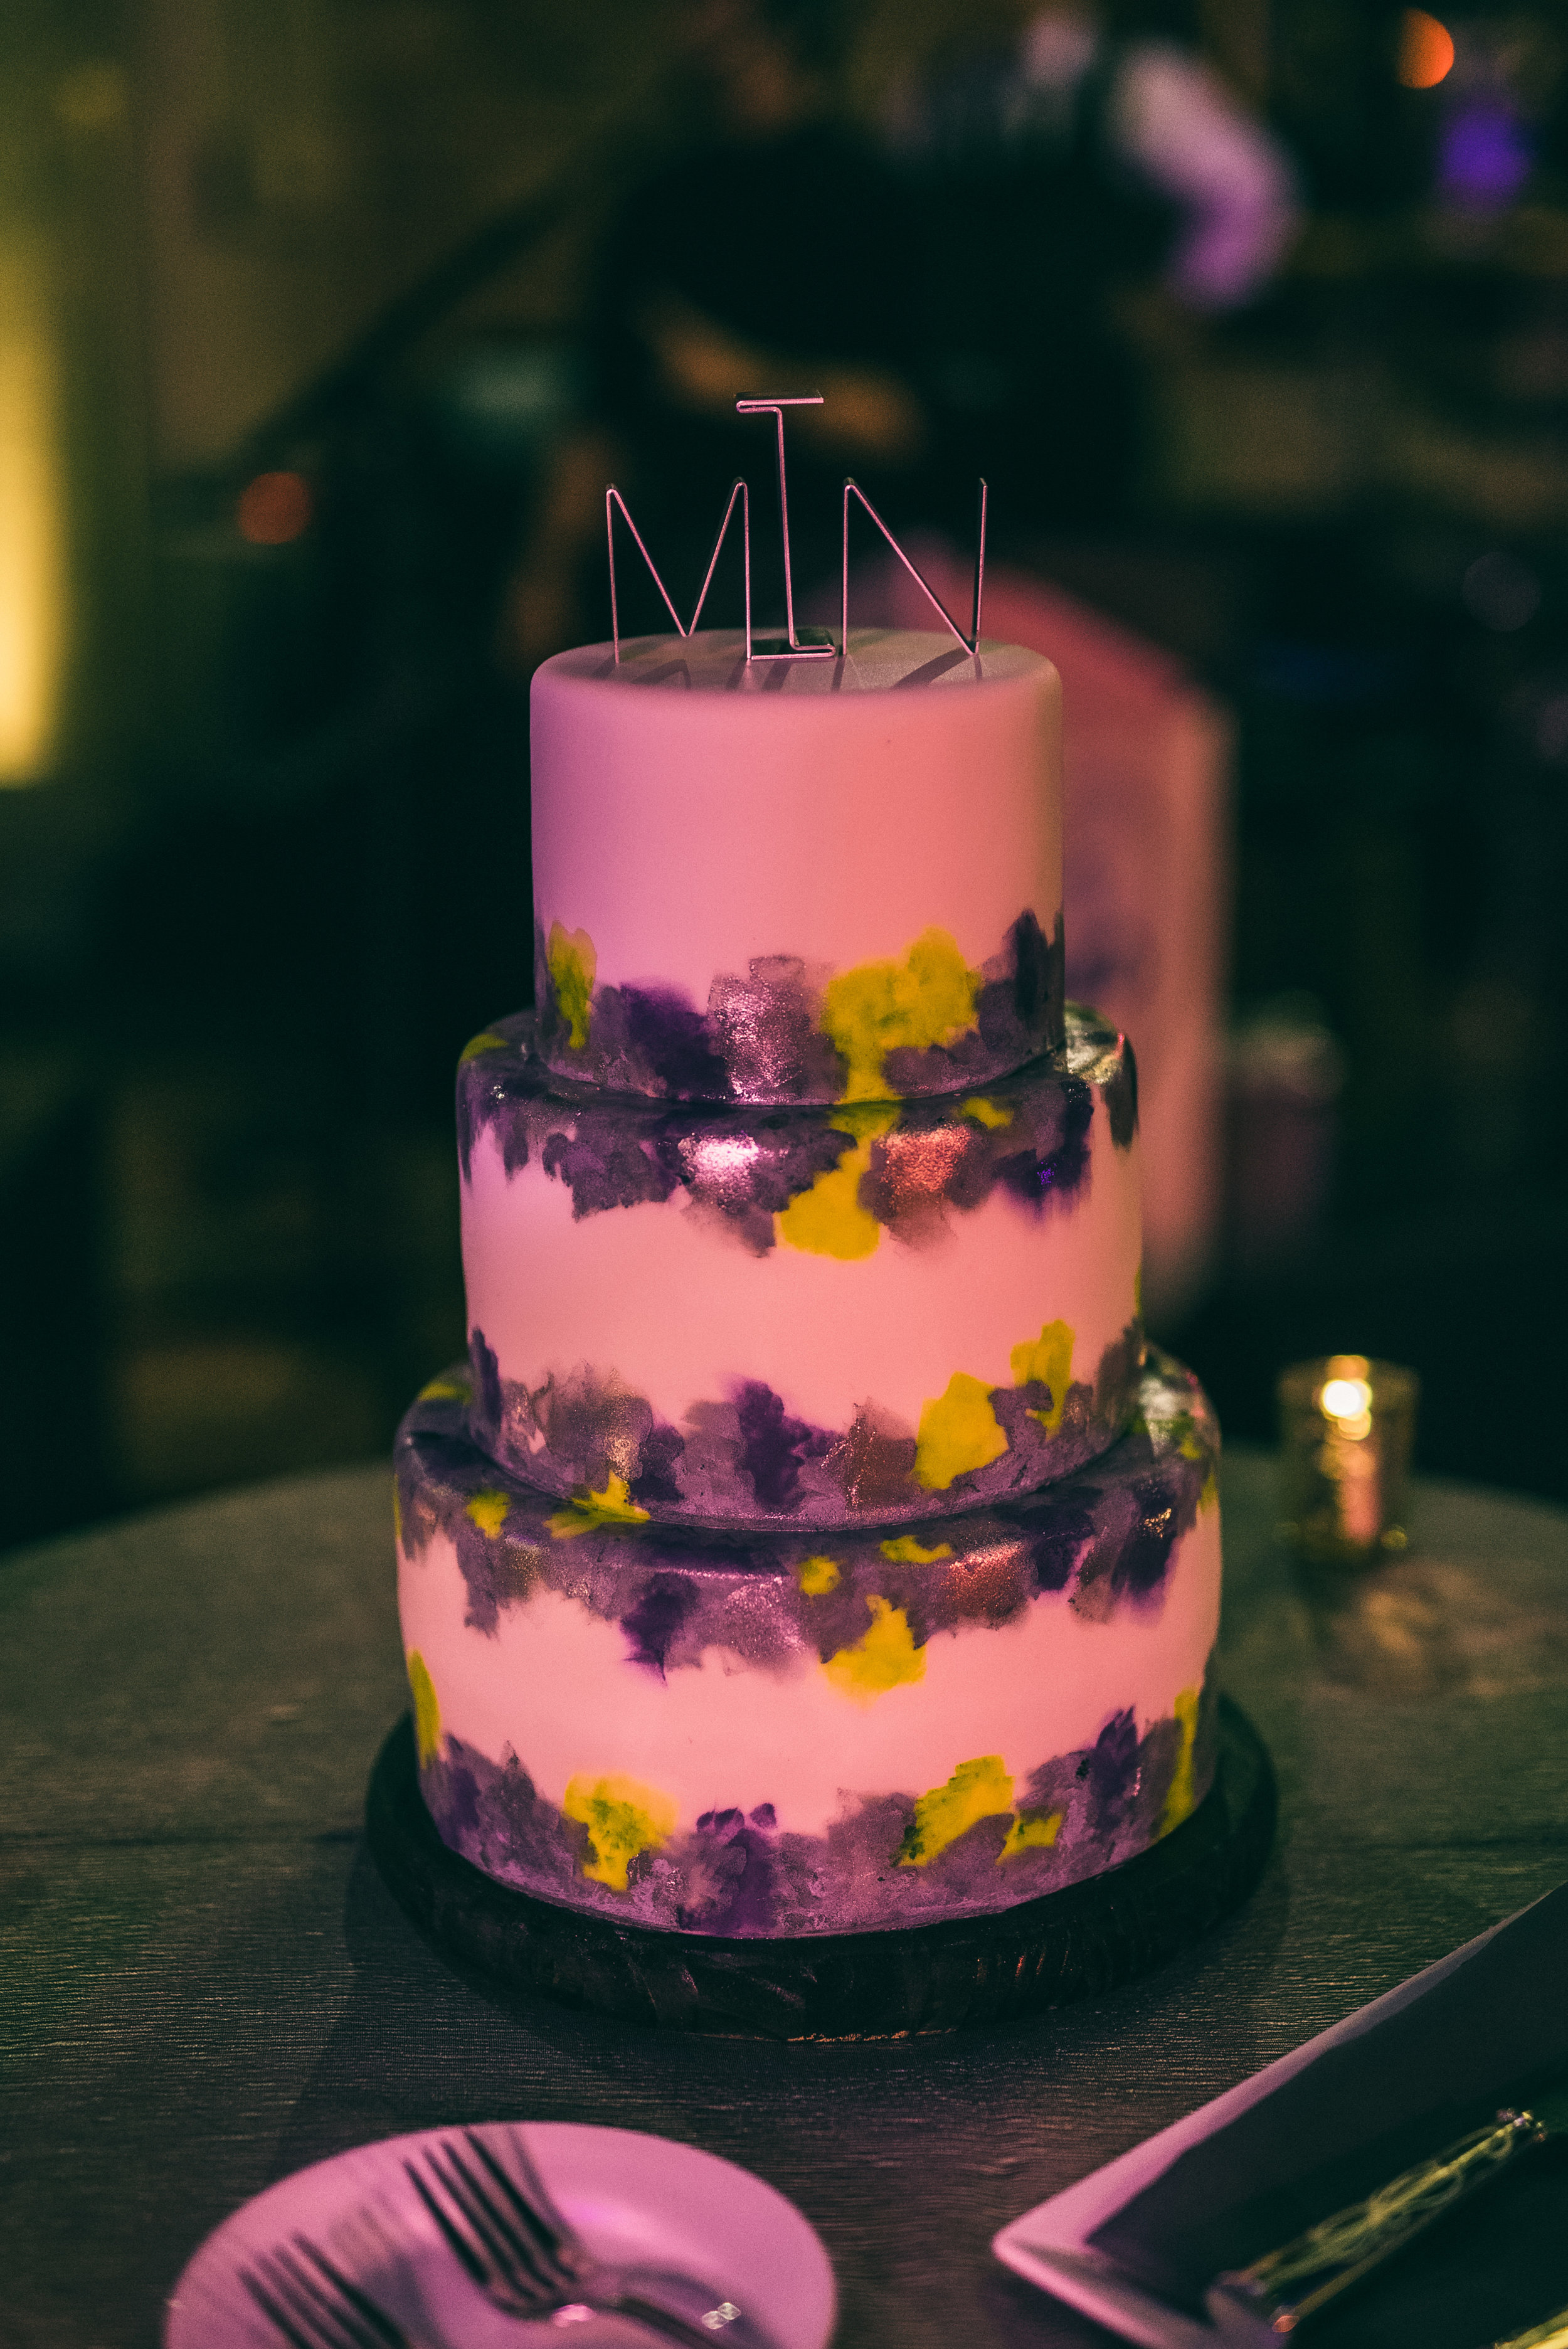 Hand painted three tier fondant wedding cake, River Roast Social House in Chicago